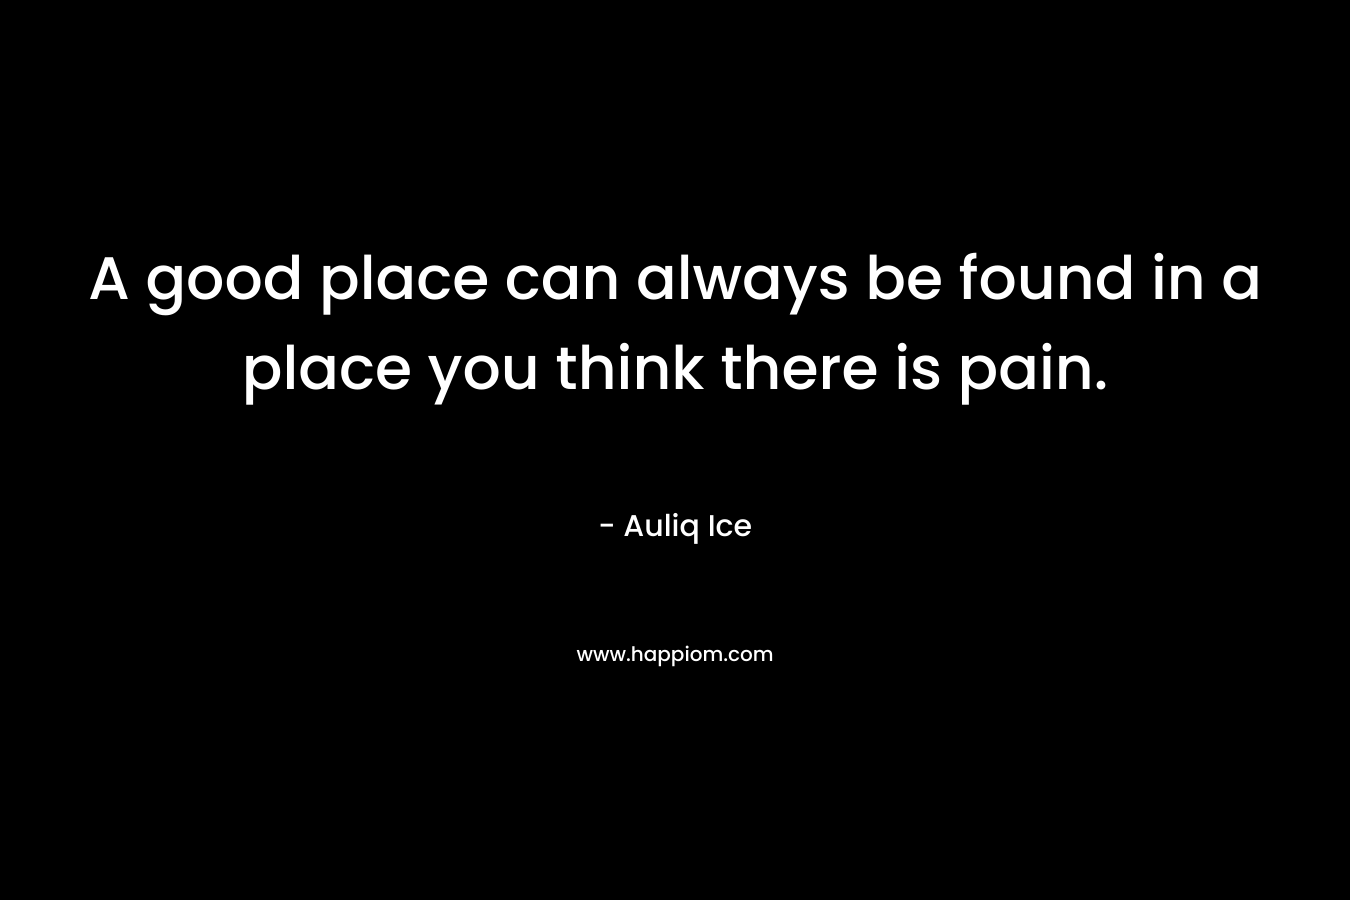 A good place can always be found in a place you think there is pain.